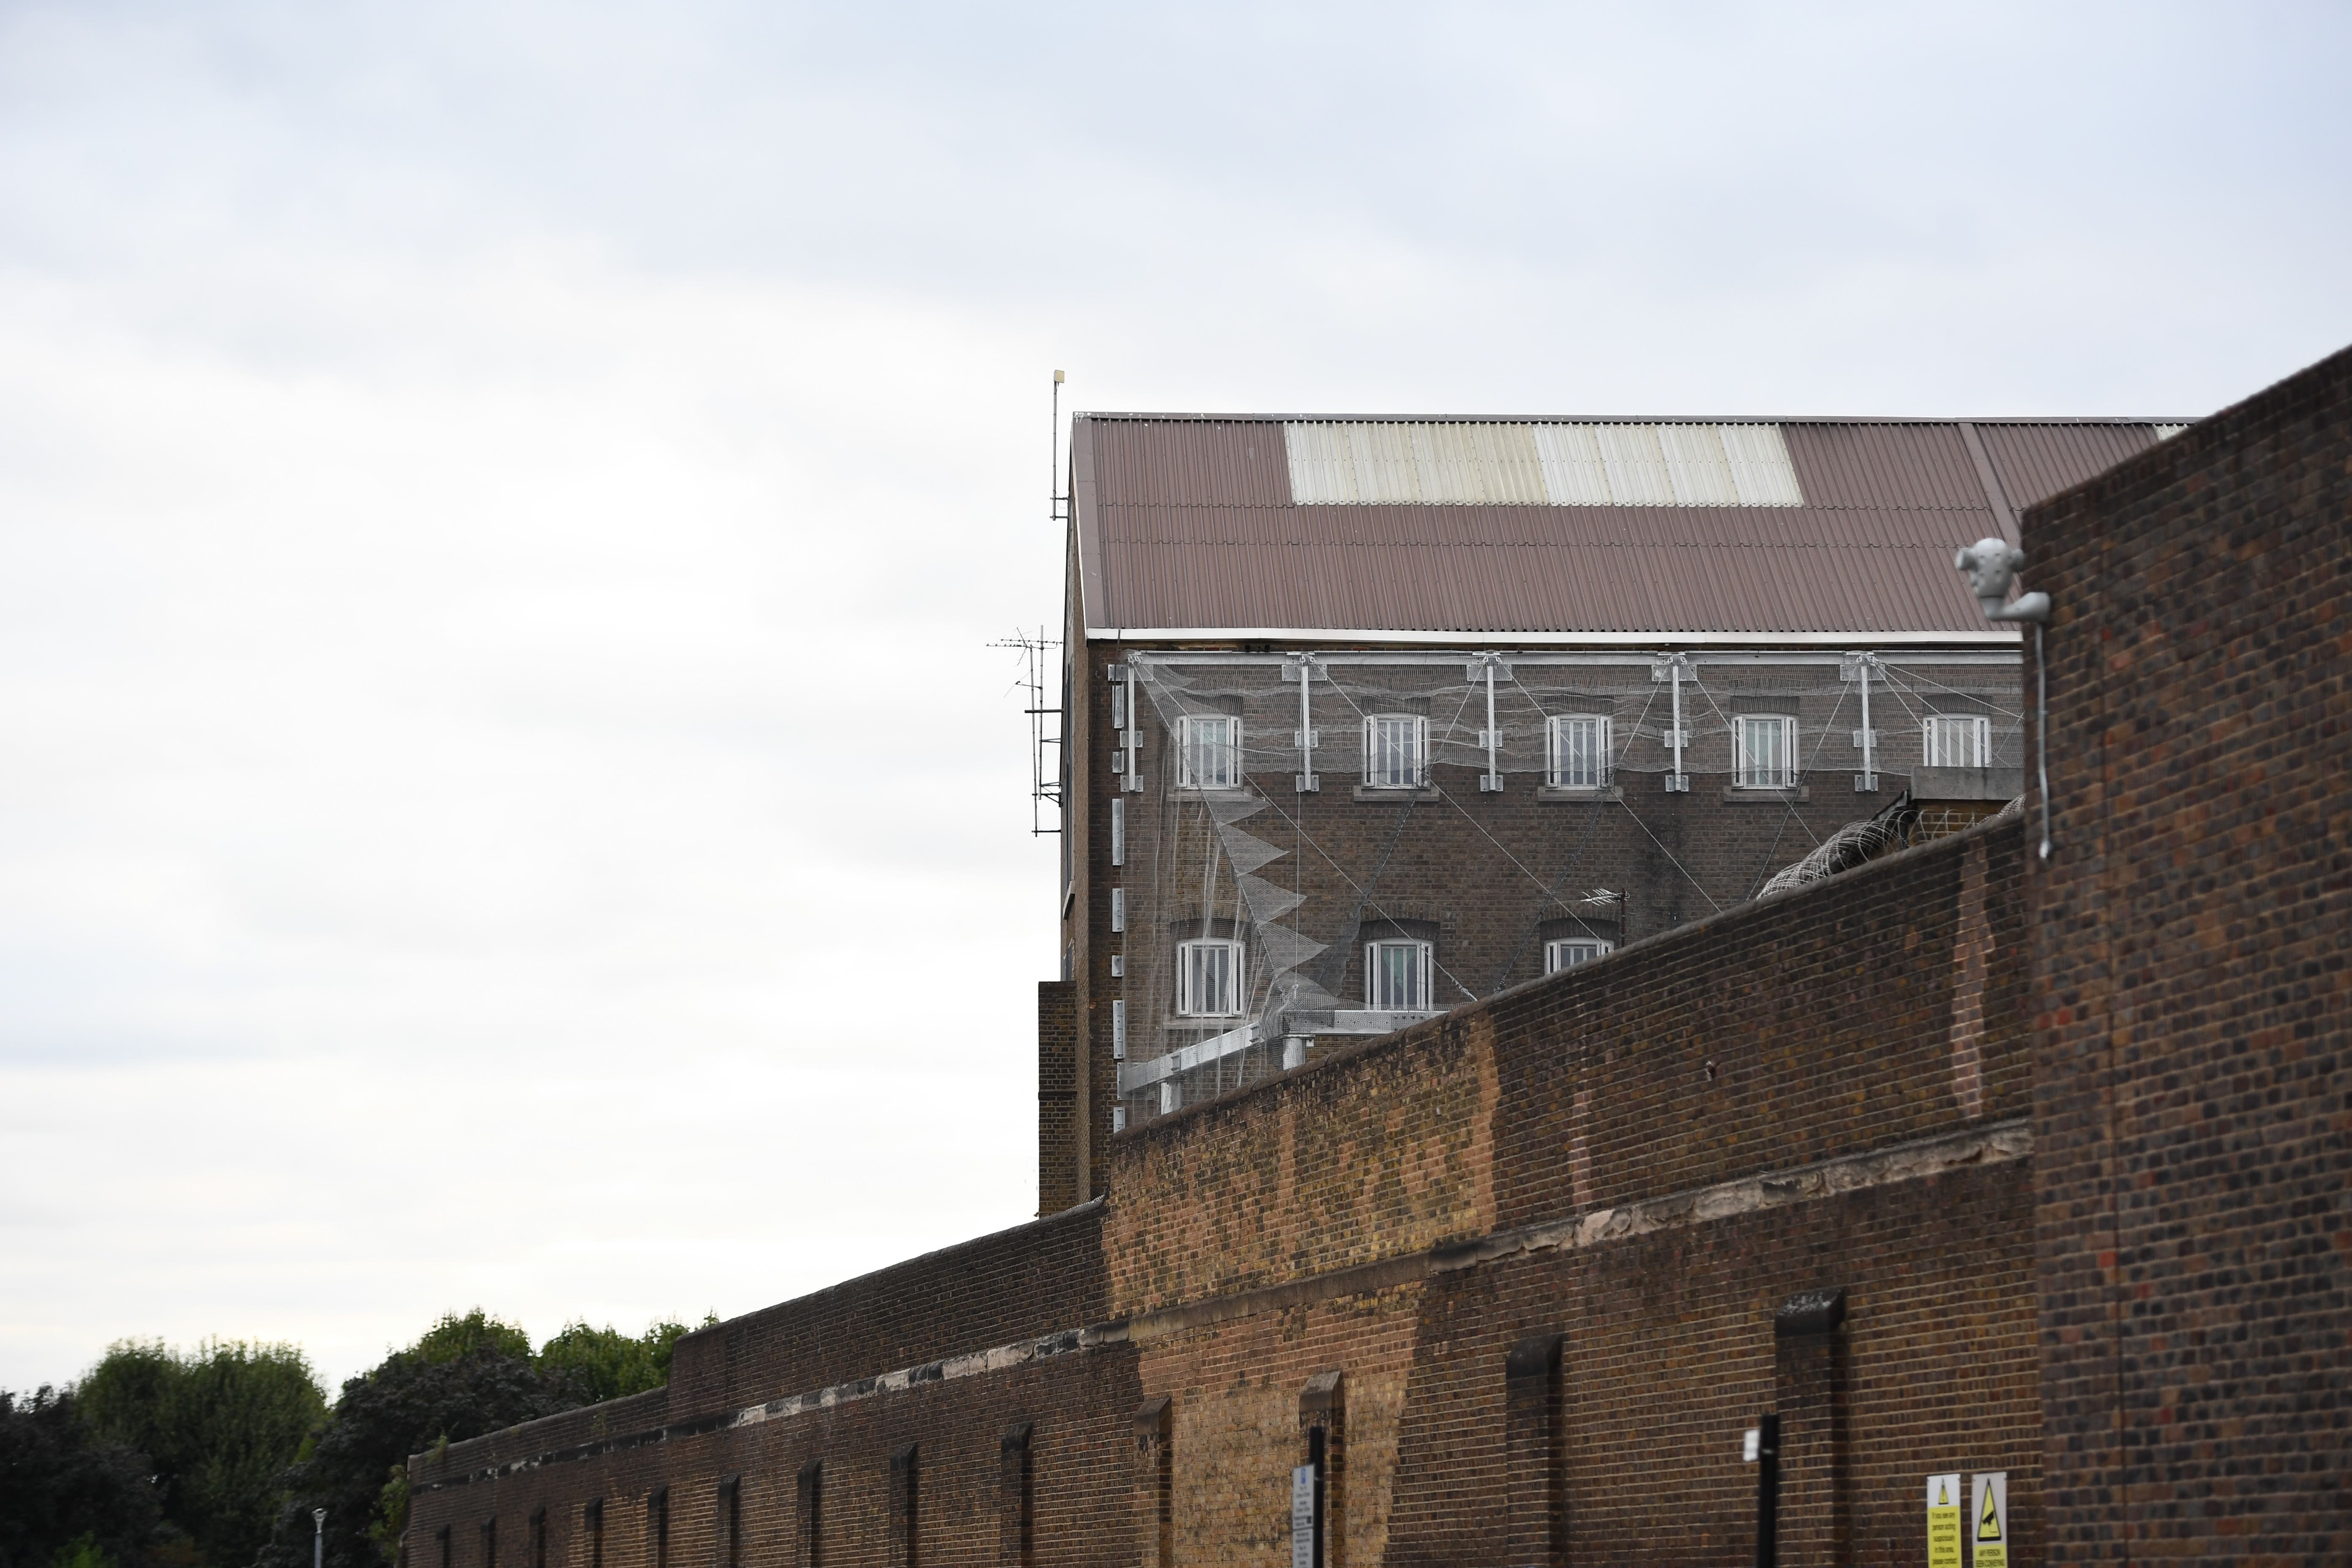 Drones are banned from flying within 400 metres of prisons, including HMP Pentonville